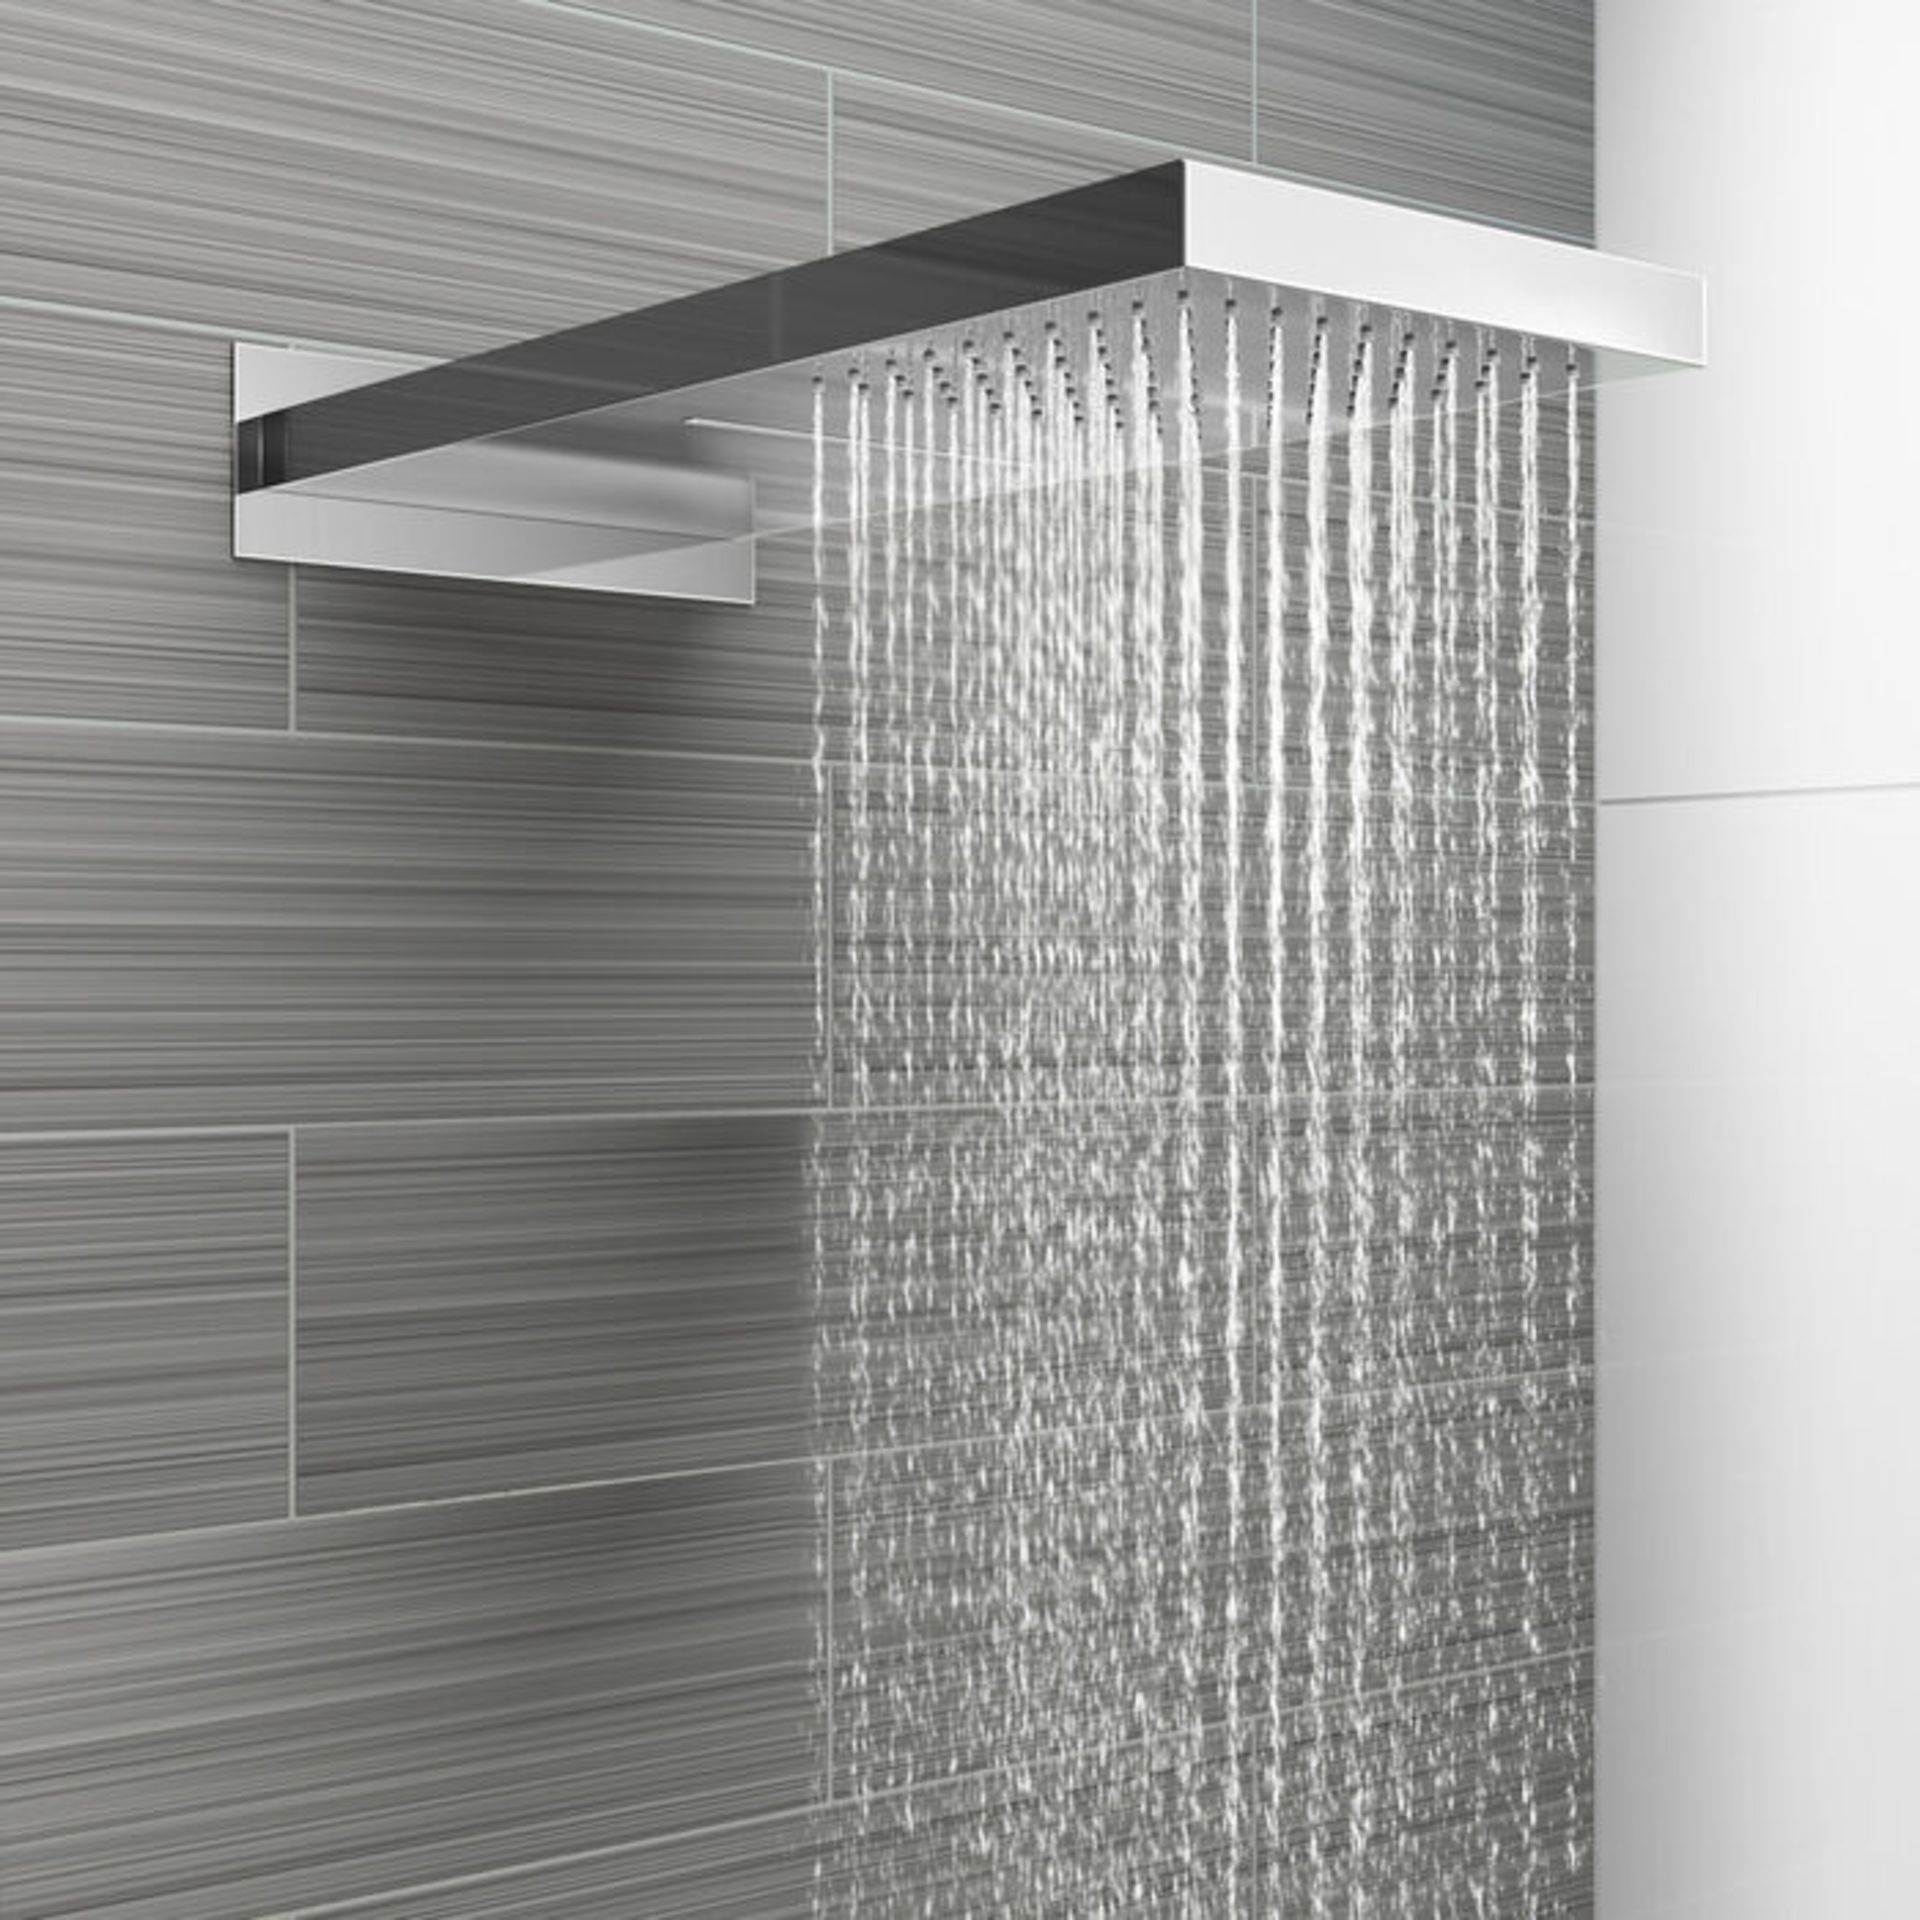 (AA14) Stainless Steel 230x500mm Waterfall Shower Head. RRP £374.99. Dual function waterfall a... - Image 4 of 4